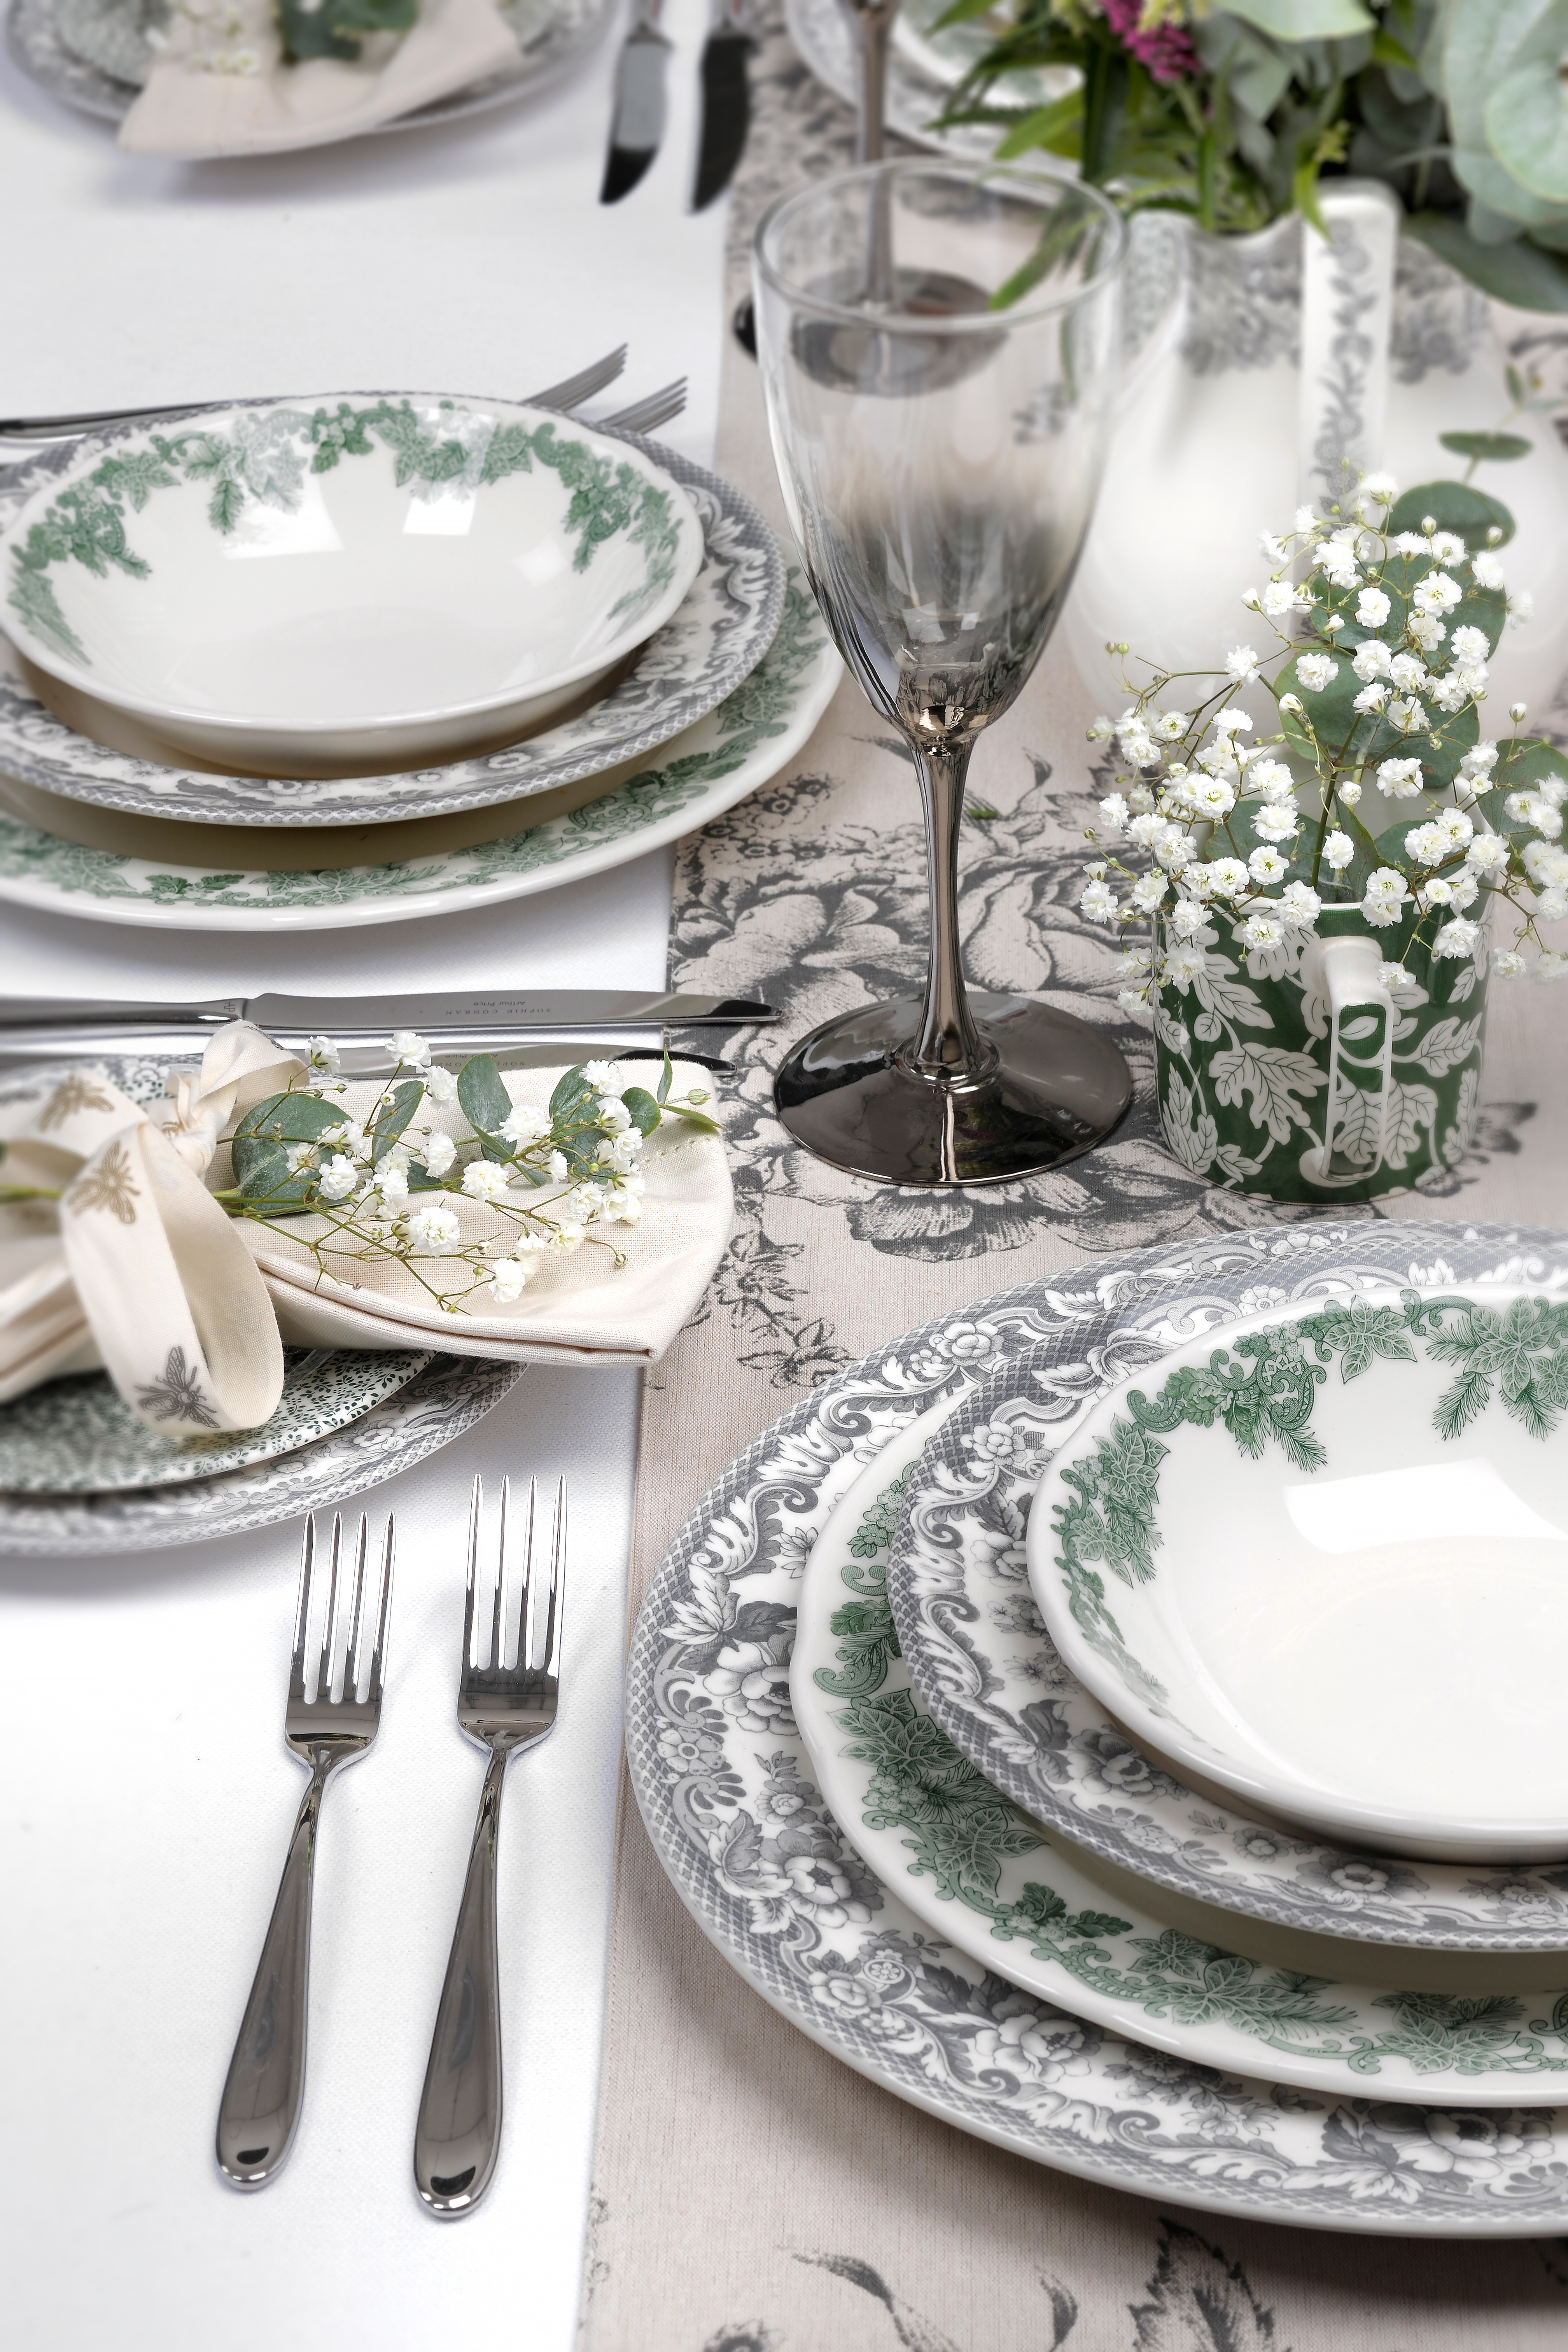 Tips for Buying Christmas Tableware – Plates, Mugs and More